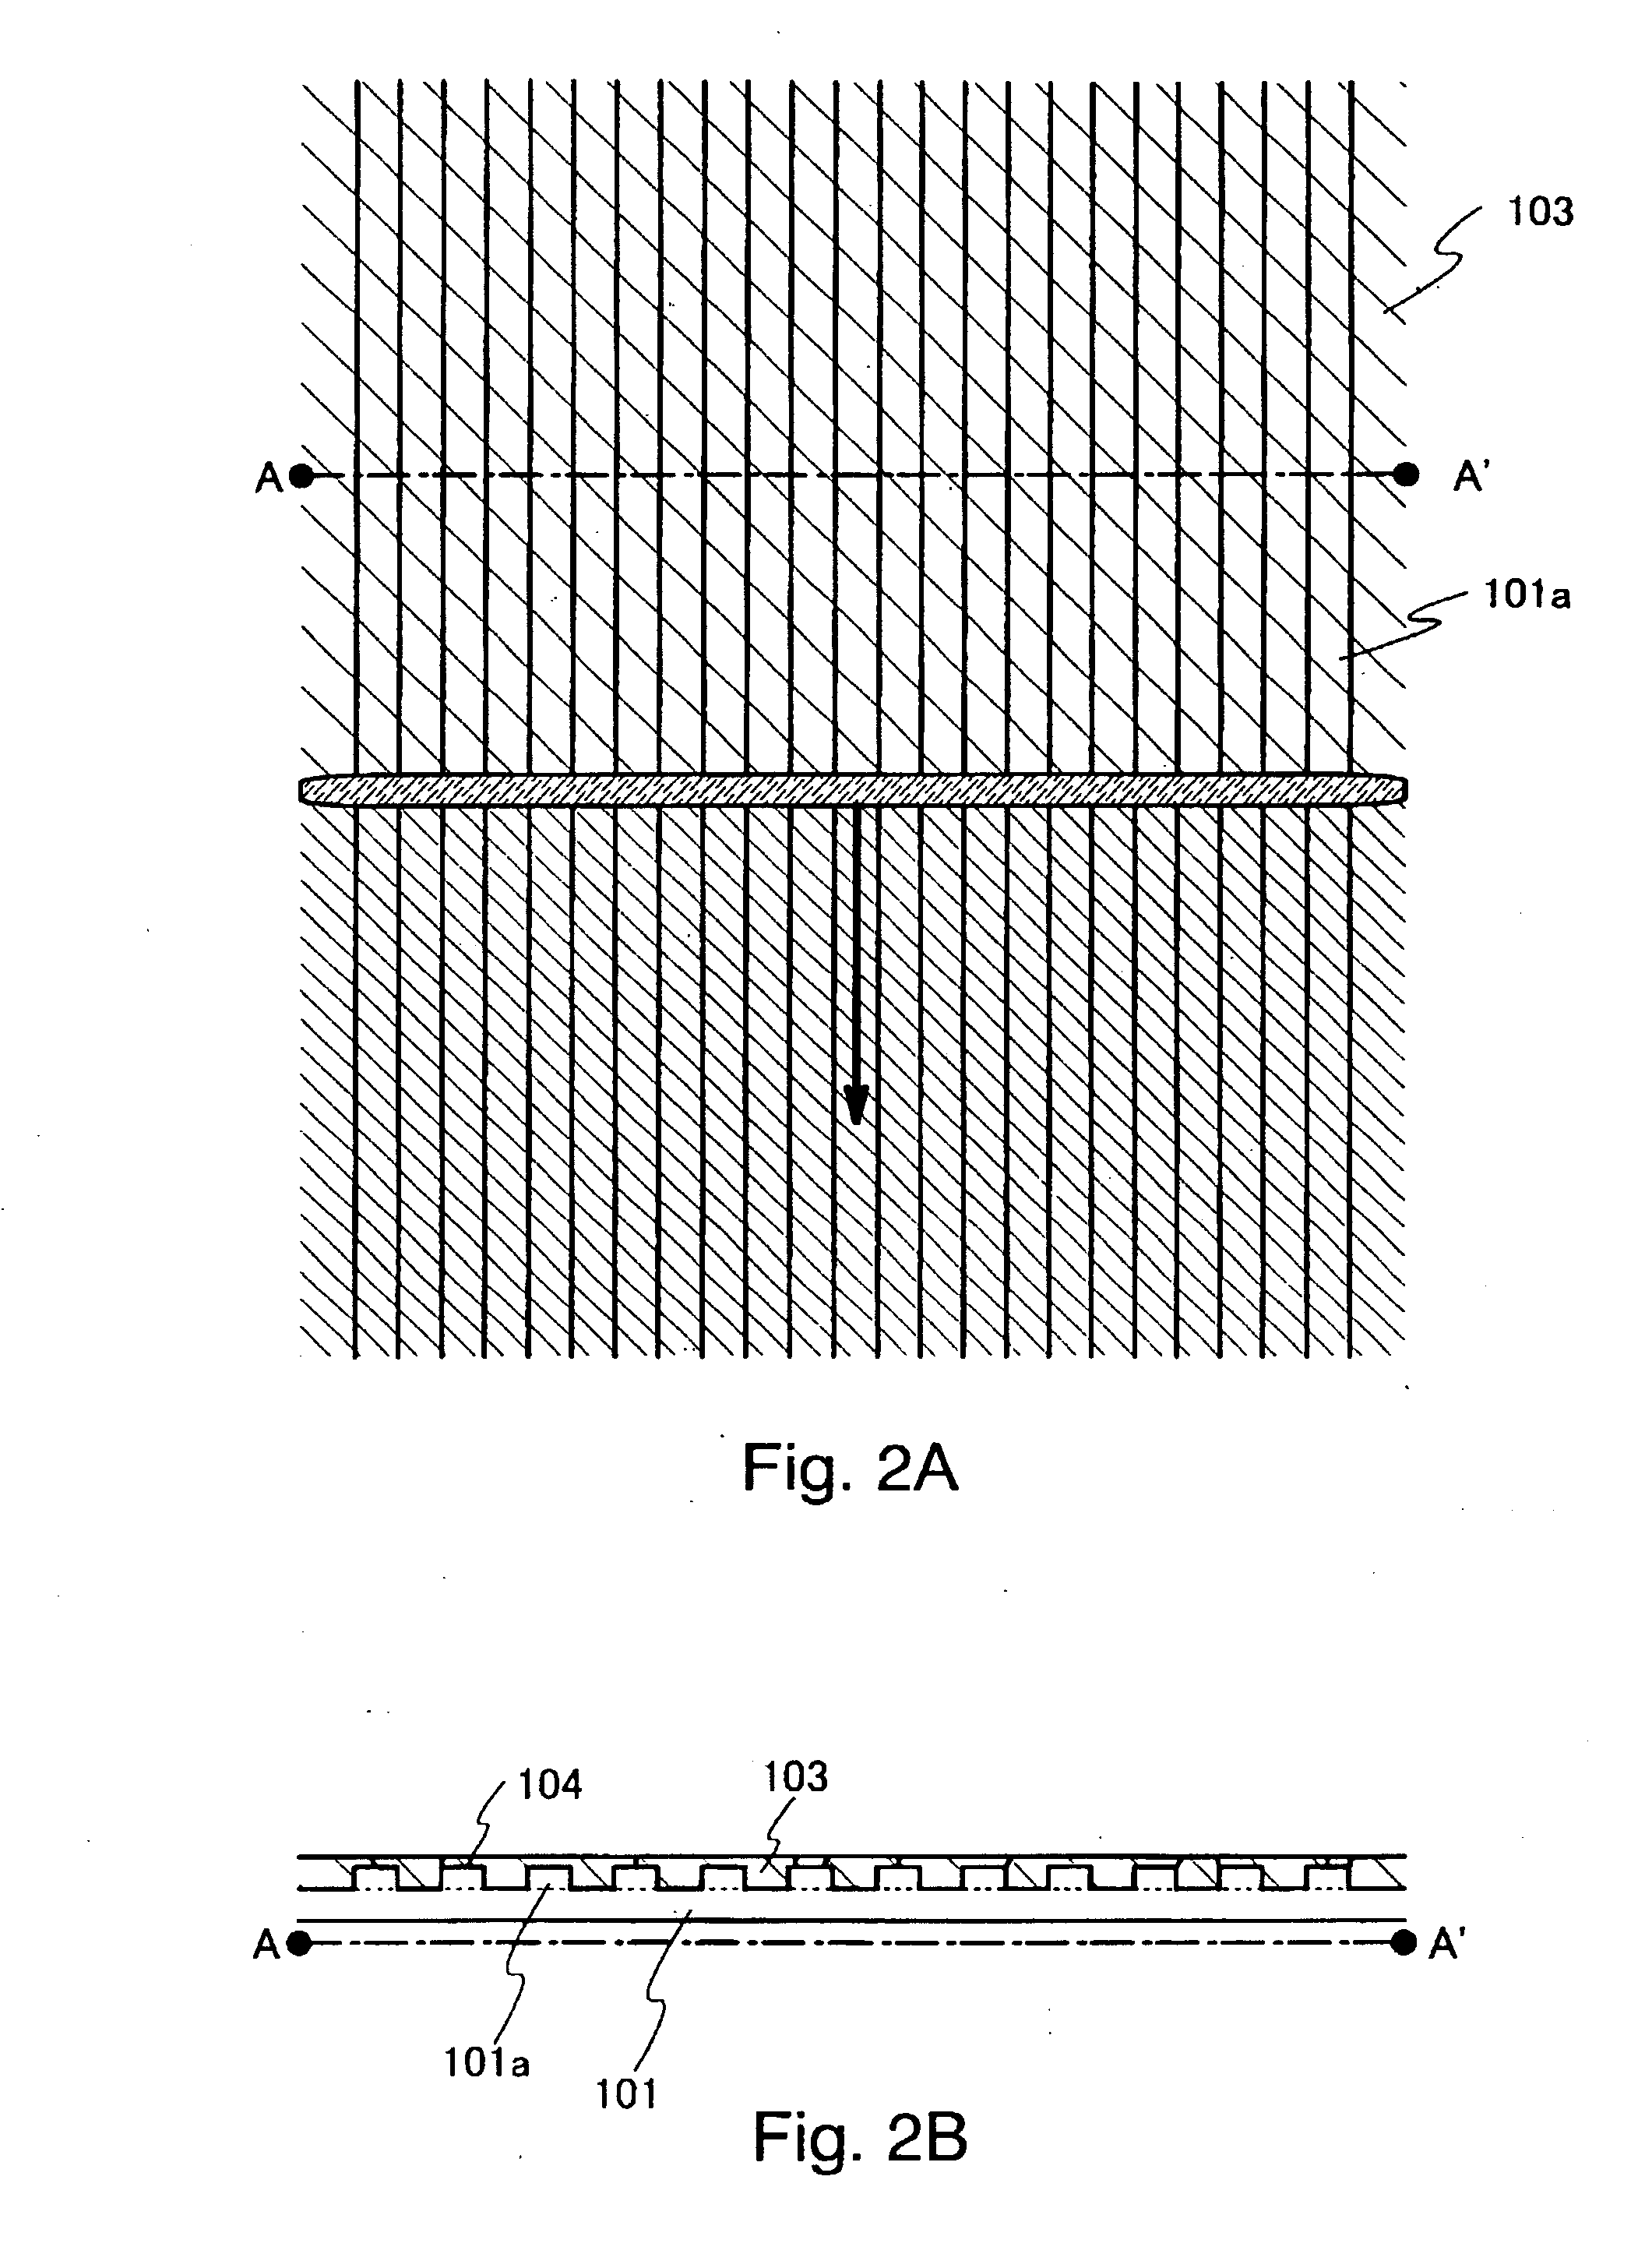 Semiconductor device, method of manufacturing the same, and method of designing the same